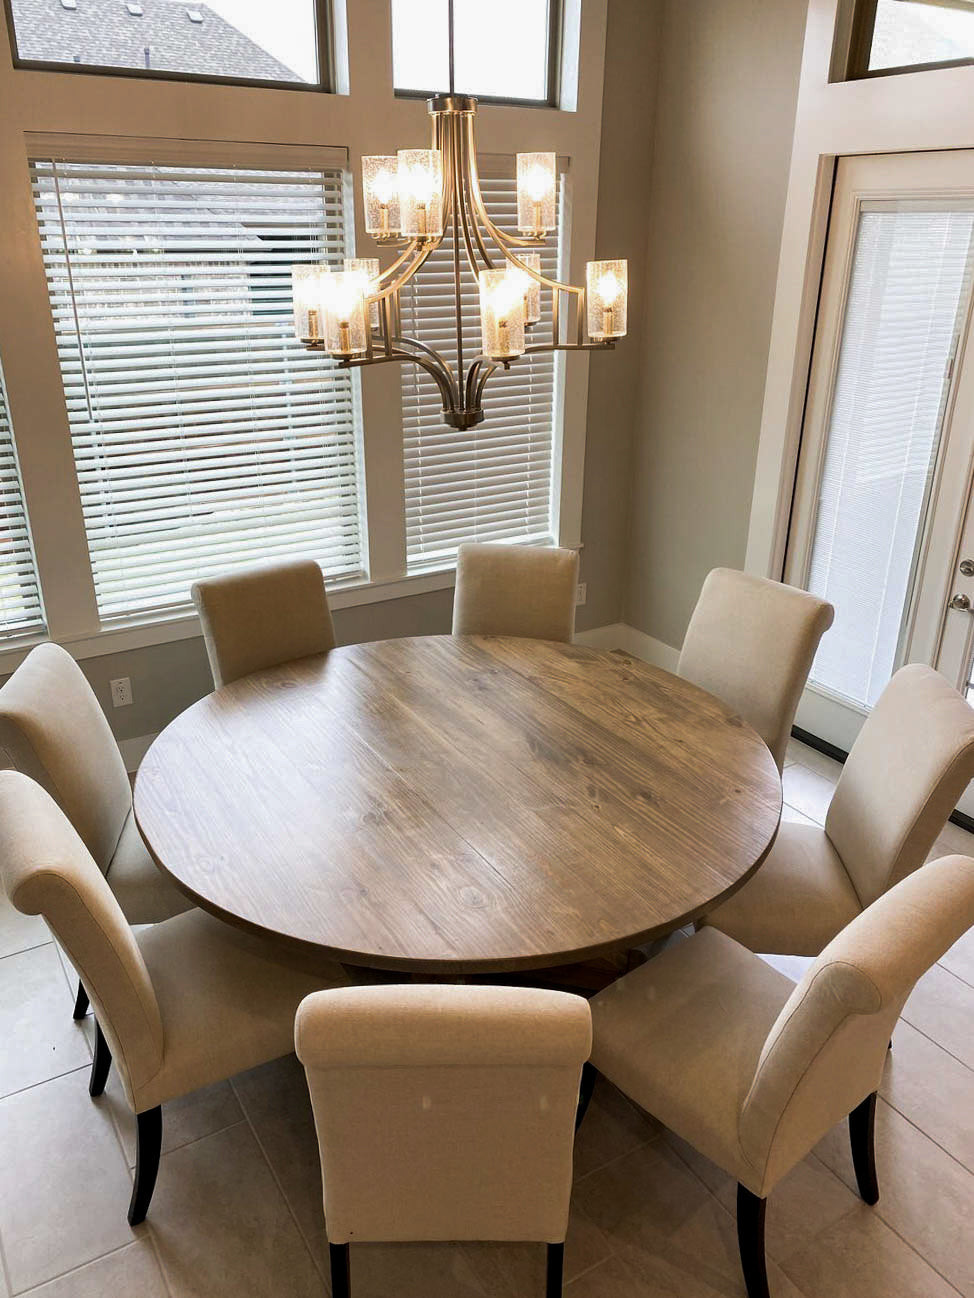 72 inch round dining room table